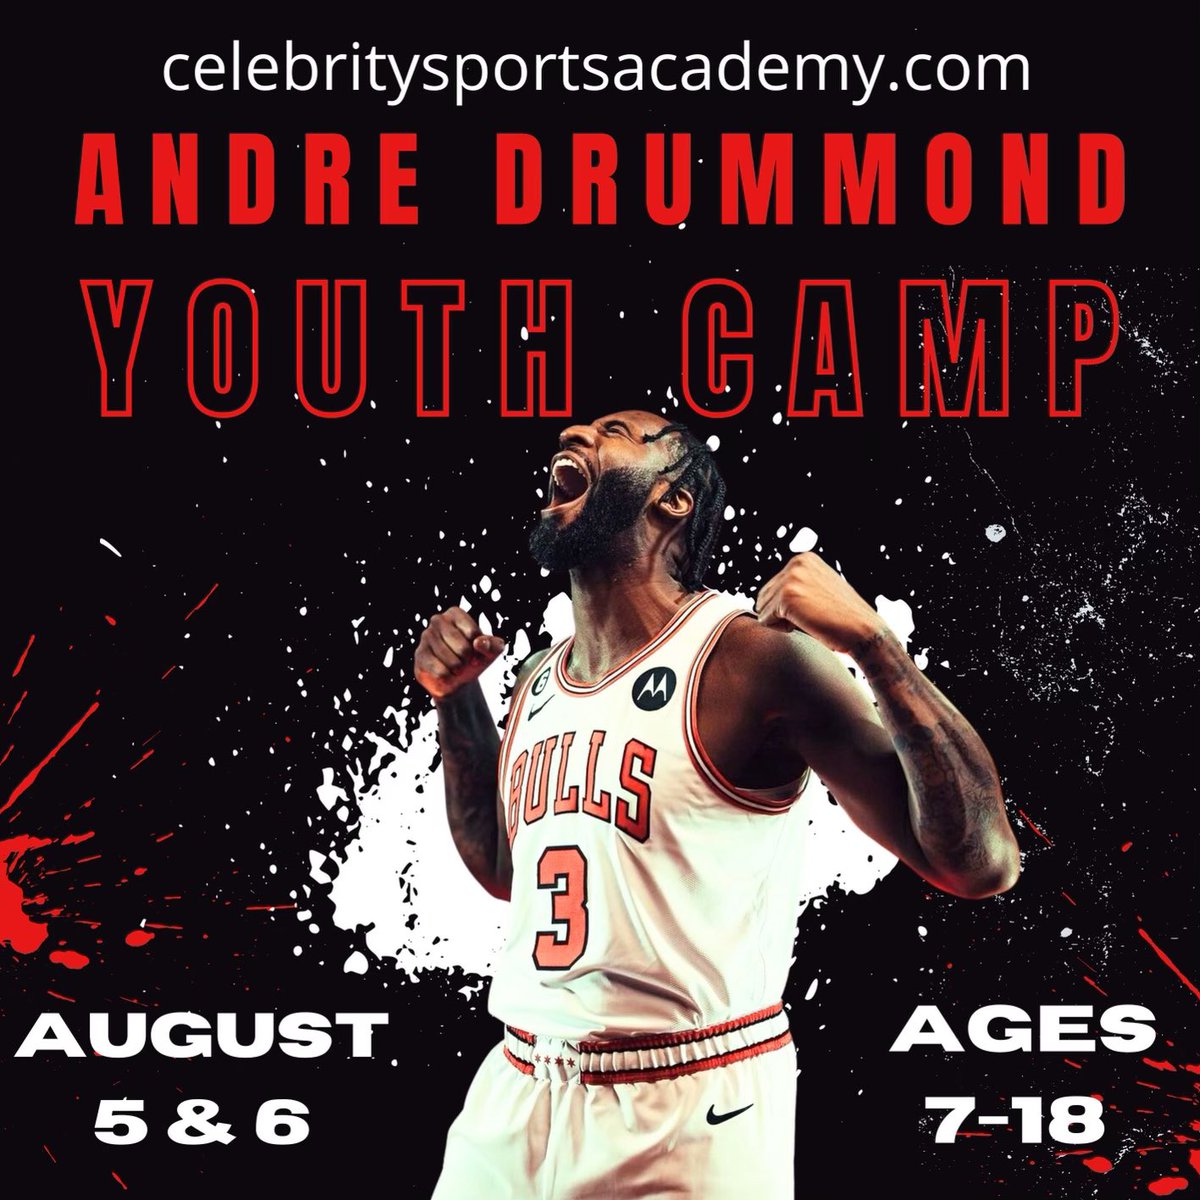 Middletown, CT I’m coming home! Join me for my youth basketball & cheer camp August 5th & 6th! Open to ages 7-18, all skill levels! Thank you to @middletown_pal and Beman Middle School for hosting us! Visit @CSA_Camps to register! See you there! 🏀📣